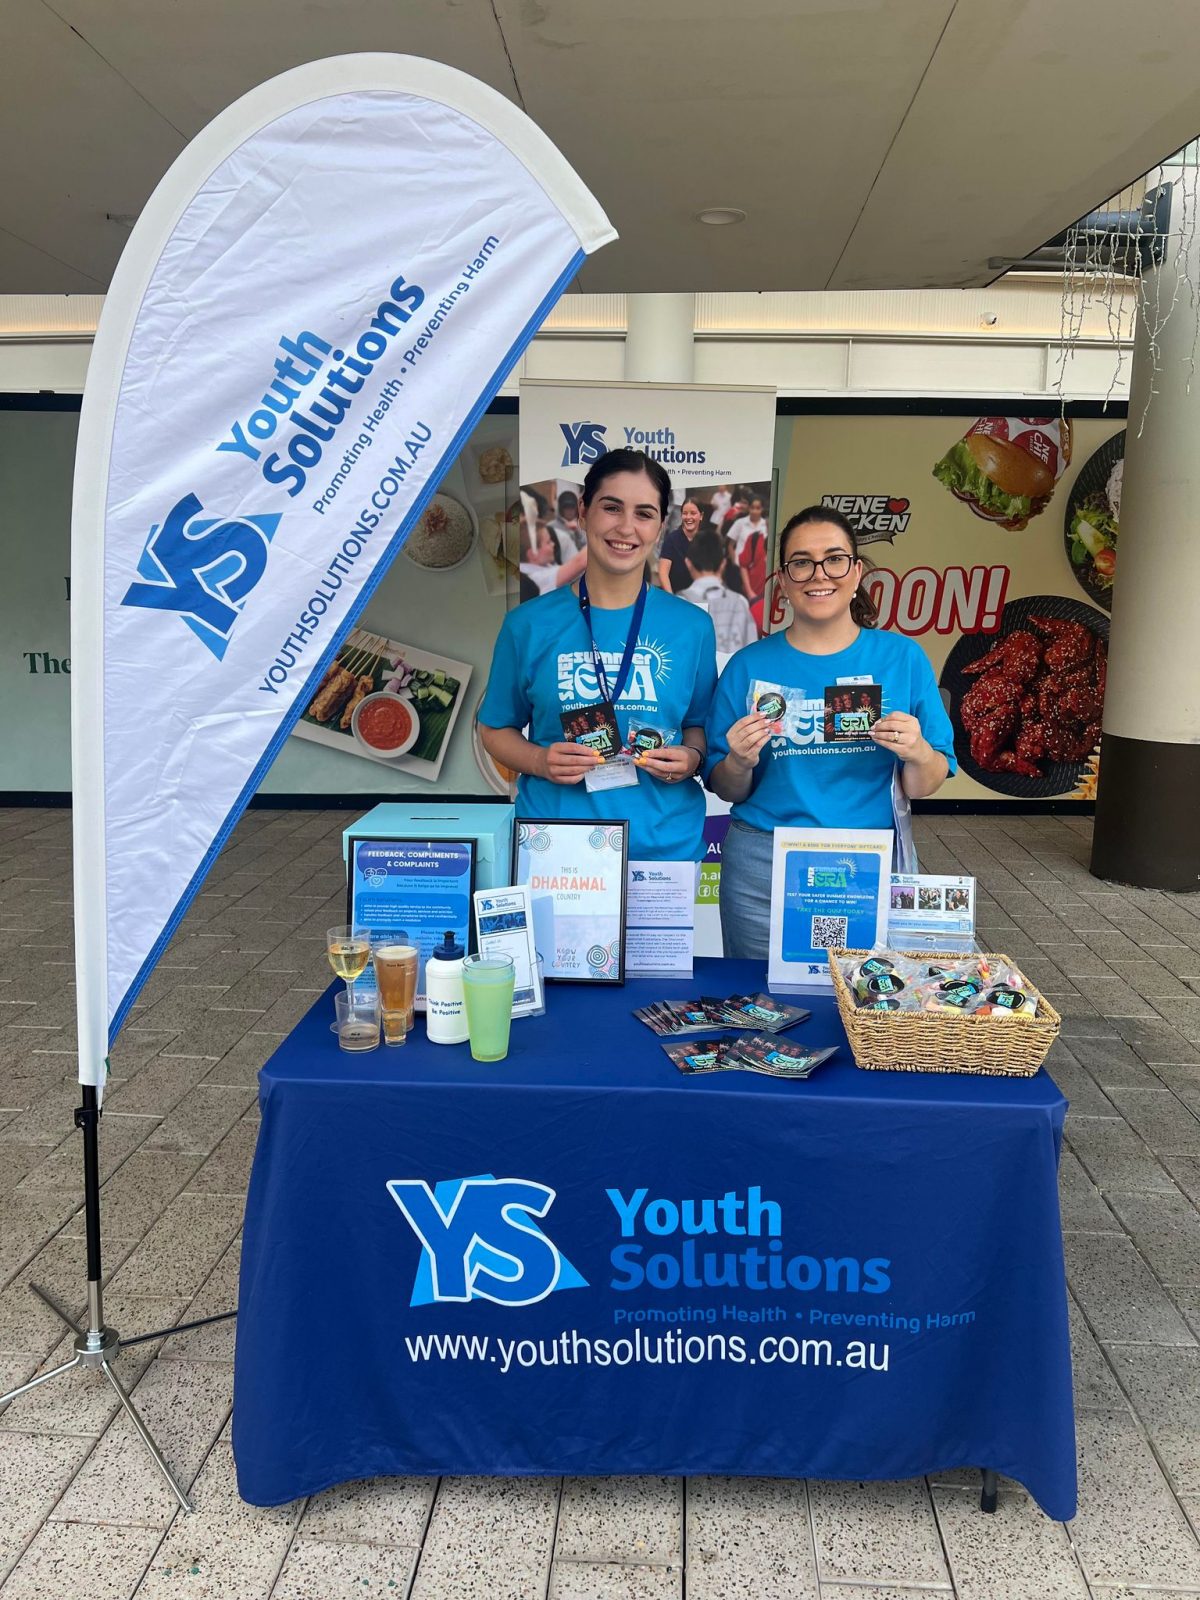 Youth Solutions staff and volunteers at a community outreach stall.